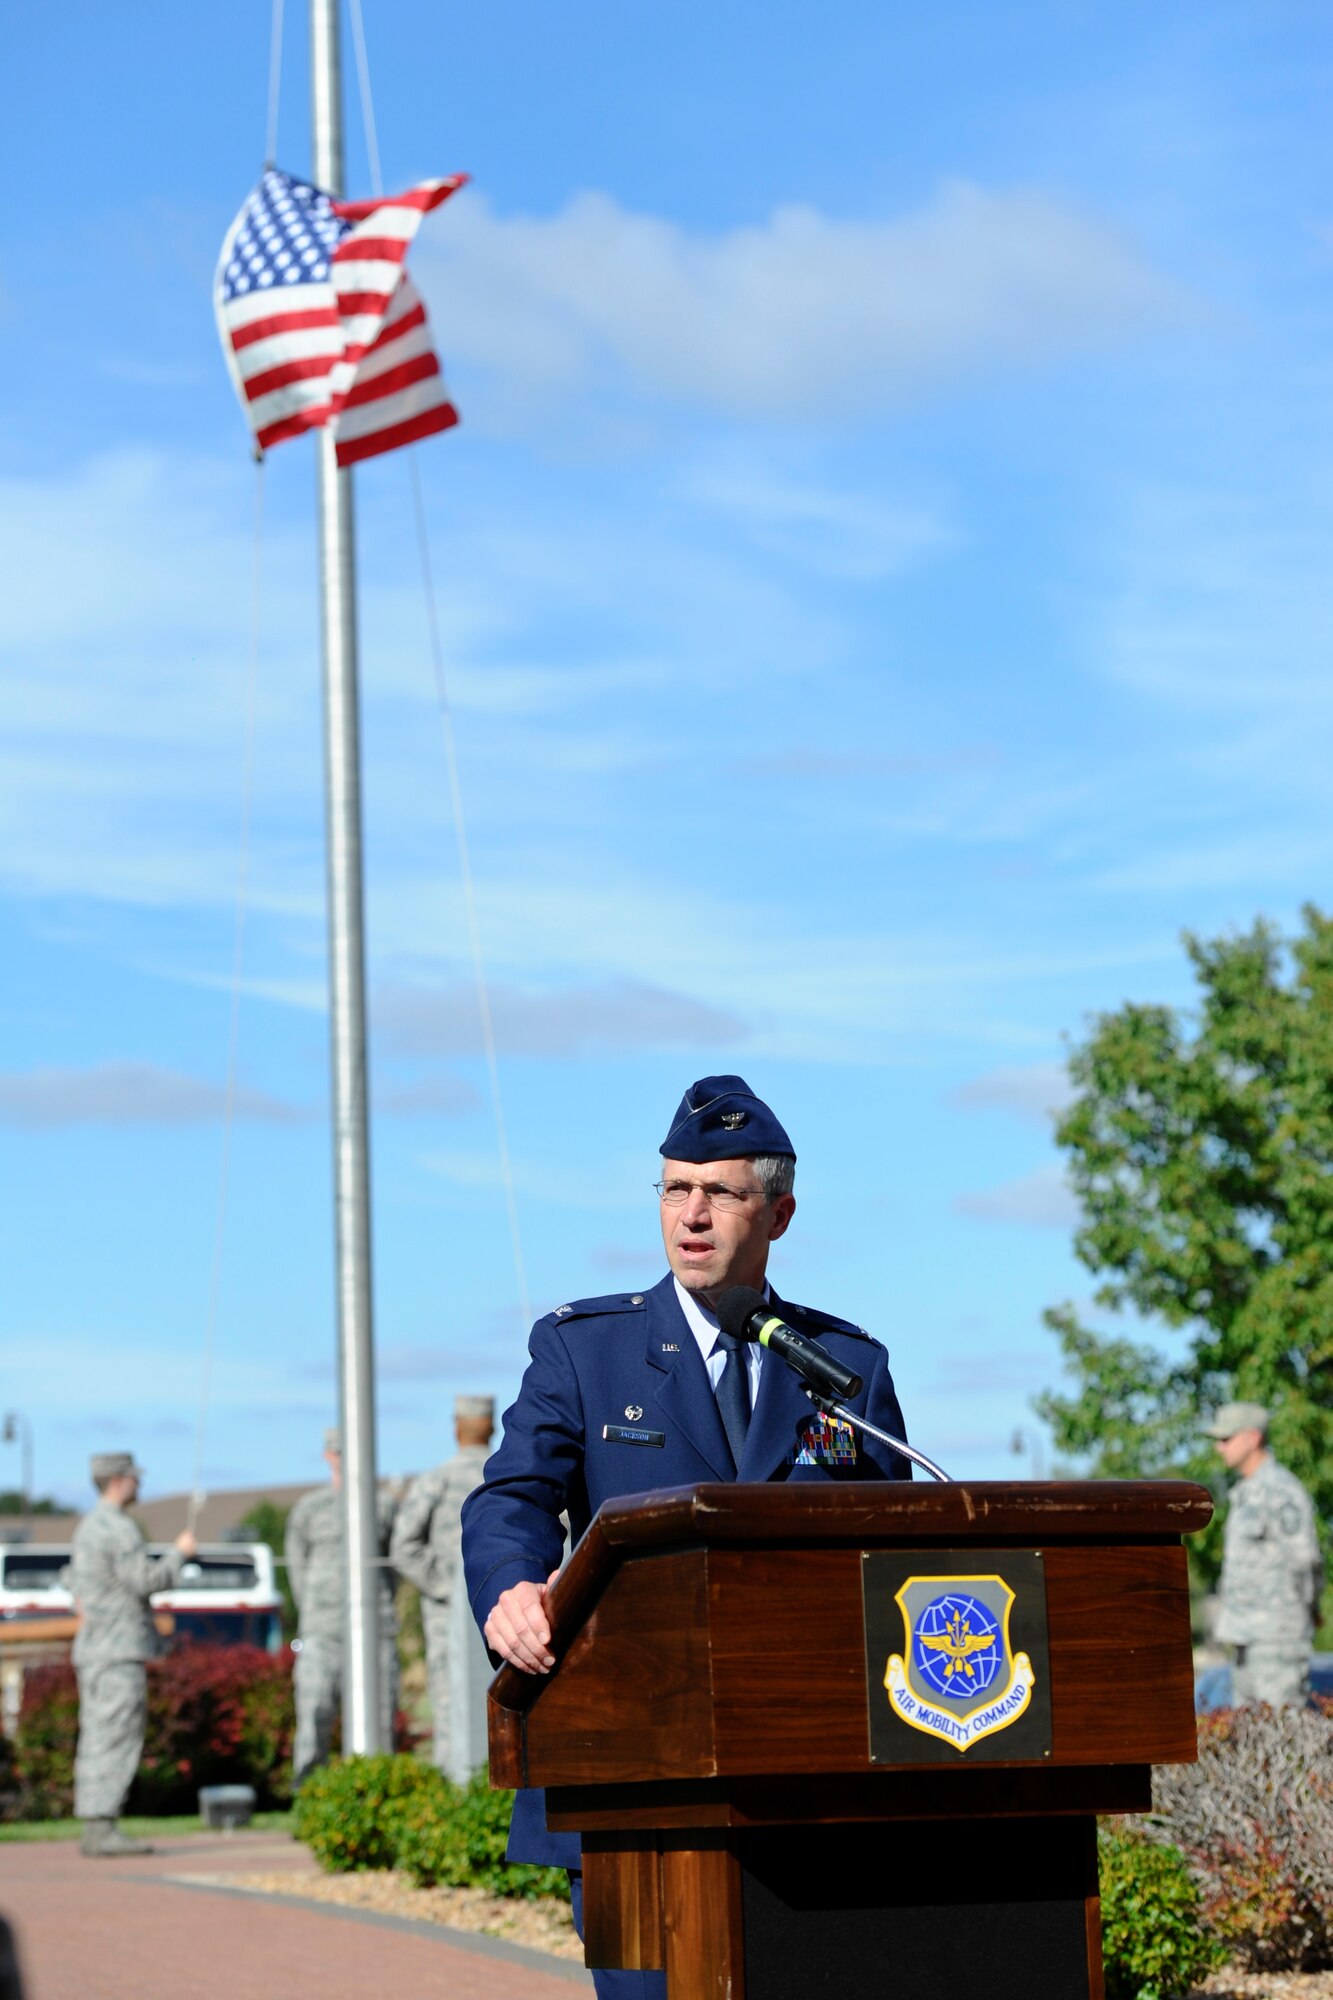 Col. Joel Jackson, 22nd Air Refueling Wing commander, addresses an audience during a Patriot Day ceremony Sept. 11, 2014, at McConnell Air Force Base, Kan. The ceremony included a moment of silence and other military traditions such as a 21-Gun Salute and a Last Alarm Ceremony. (U.S. Air Force photo/Airman 1st Class John Linzmeier)